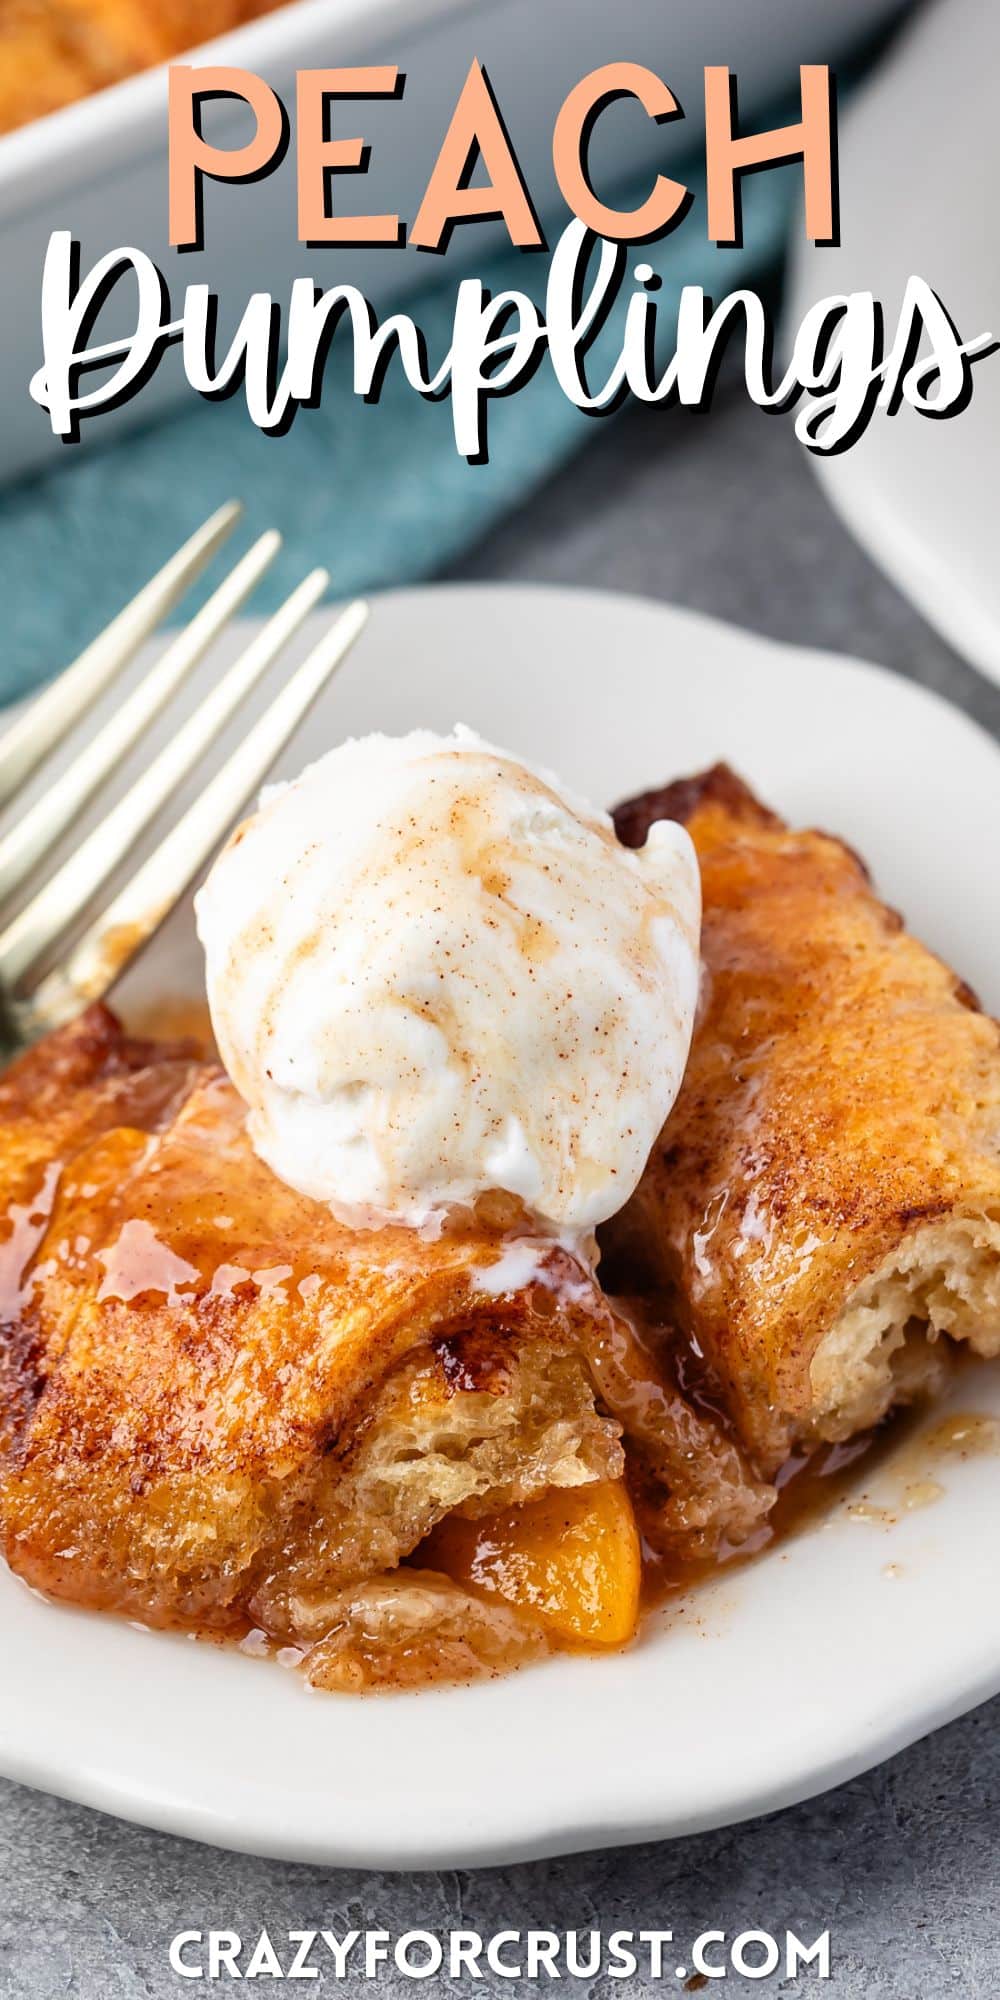 two crescent roll dumplings on a white plate next to a fork with ice cream on top and words on the image.